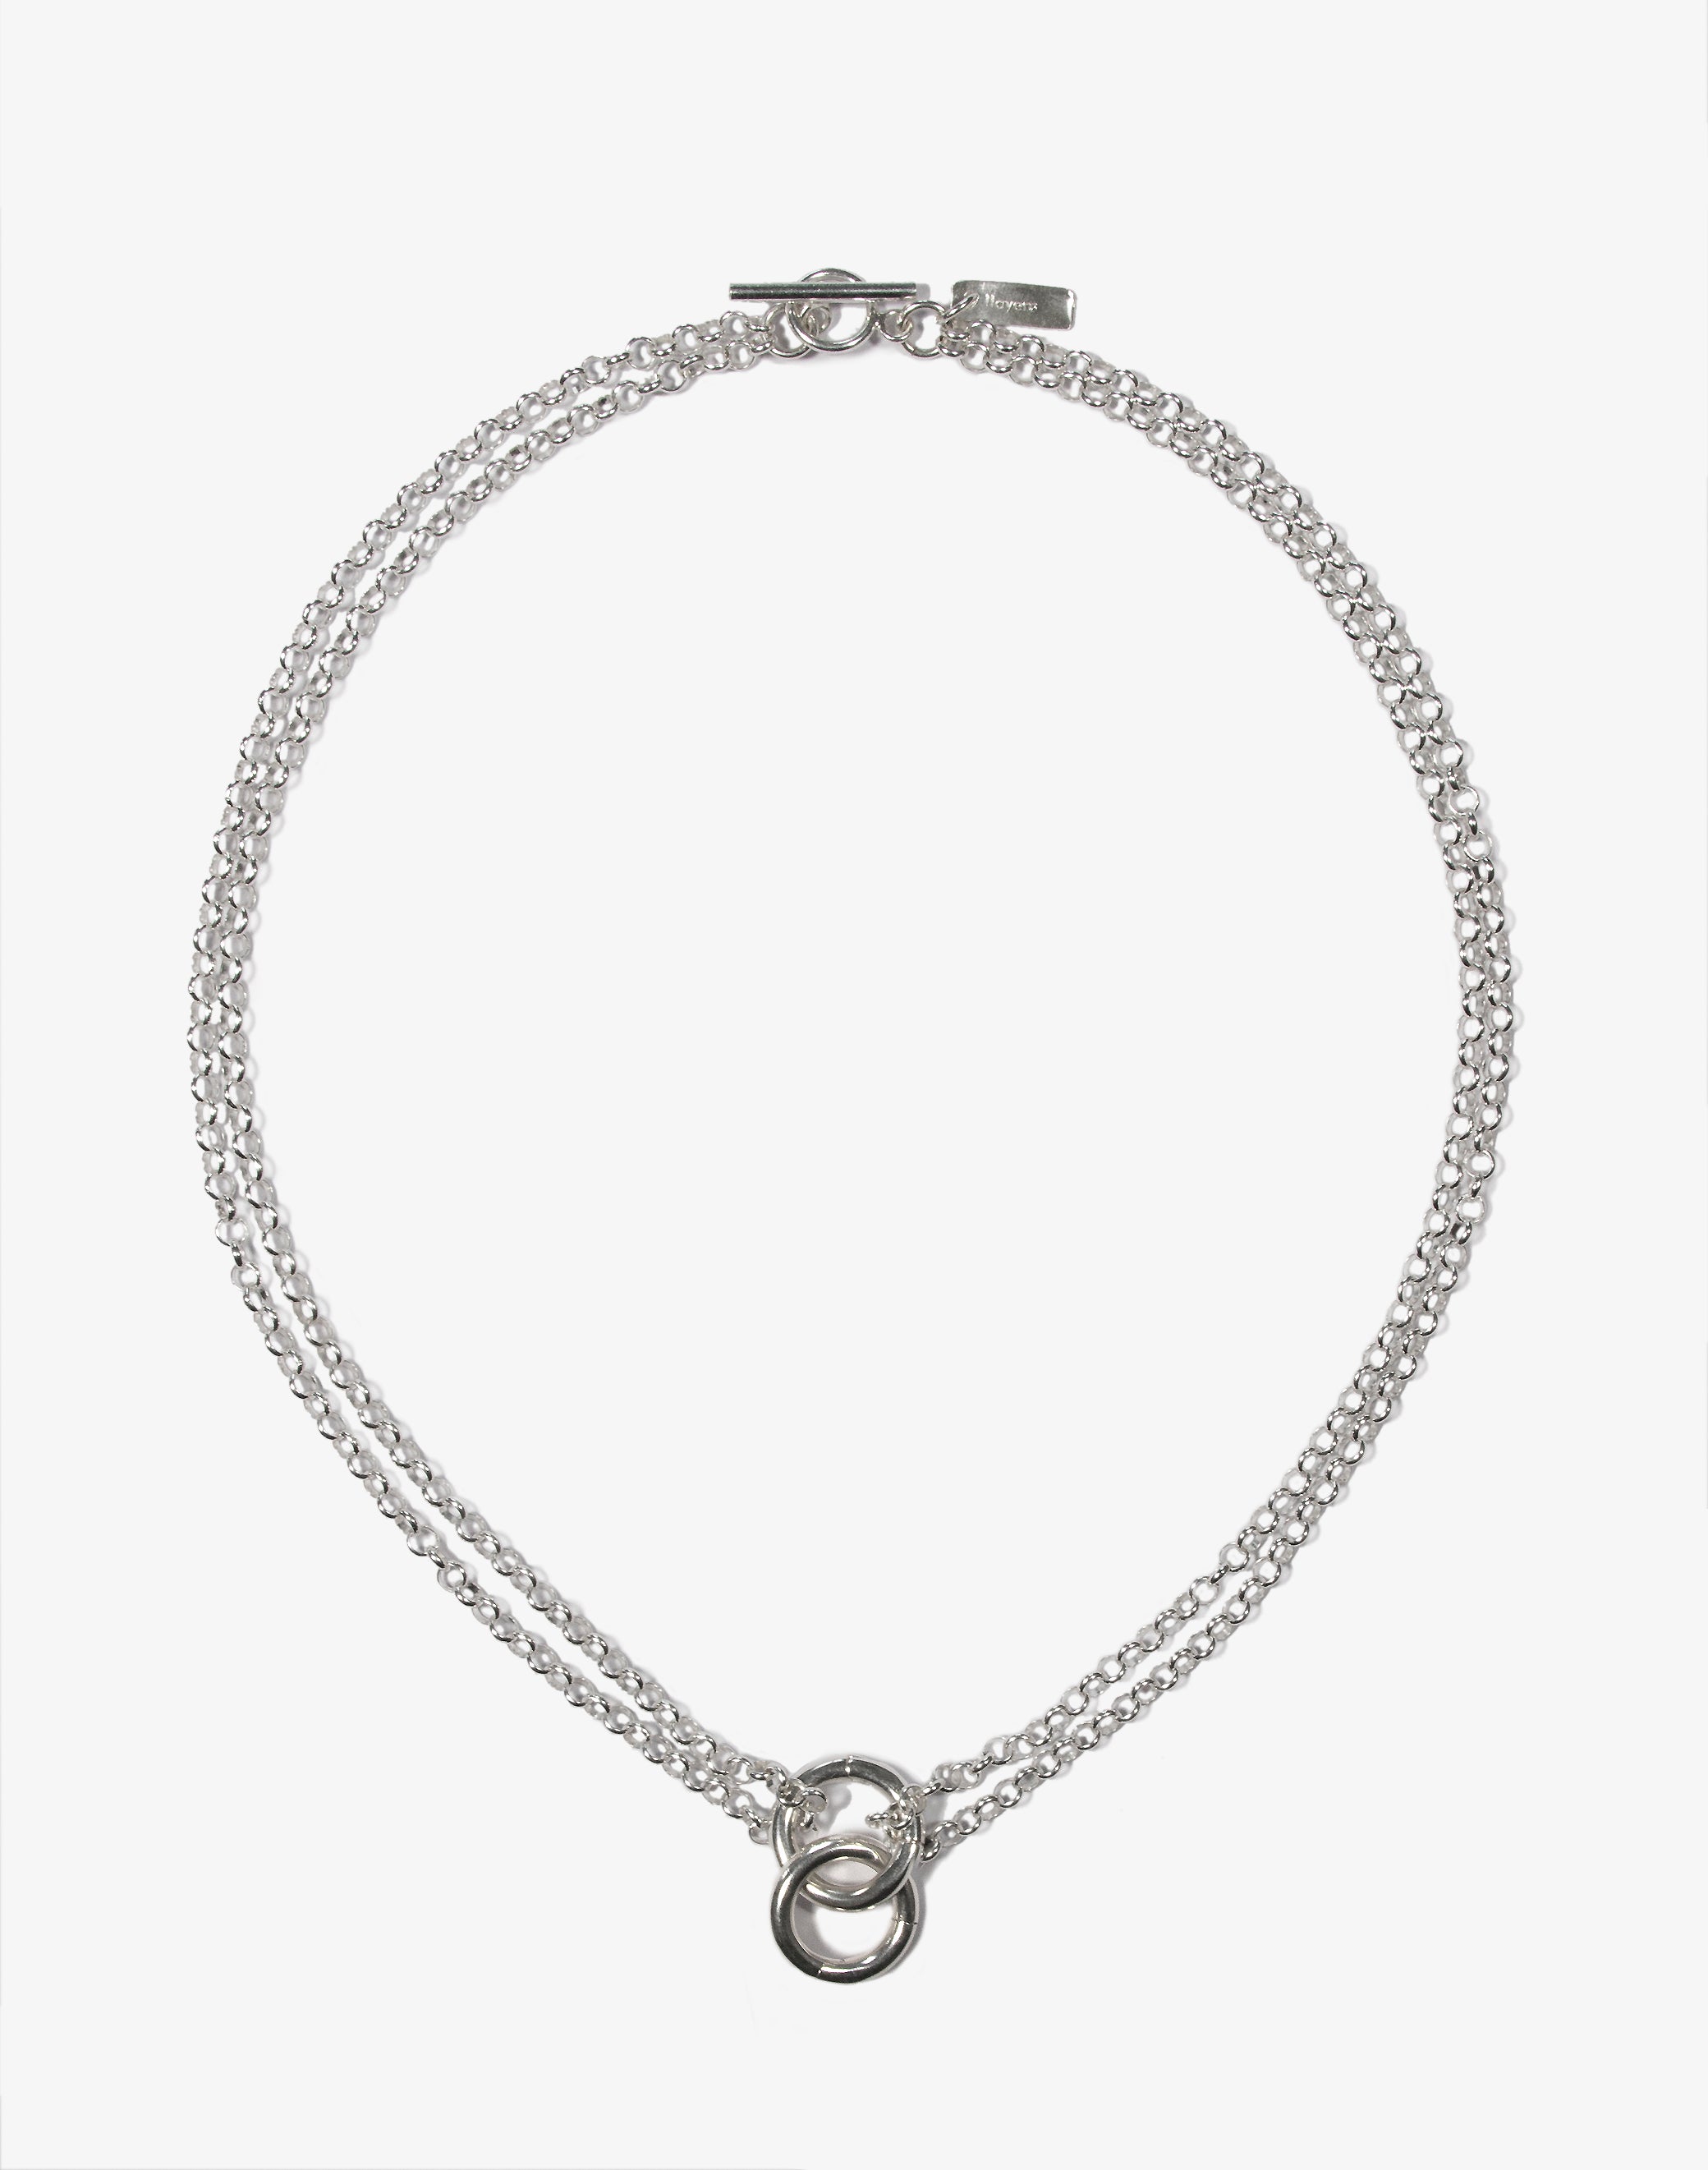 llayers jewelry unite unisex men silver chain rings choker necklace - Made In Brookyn New York 4